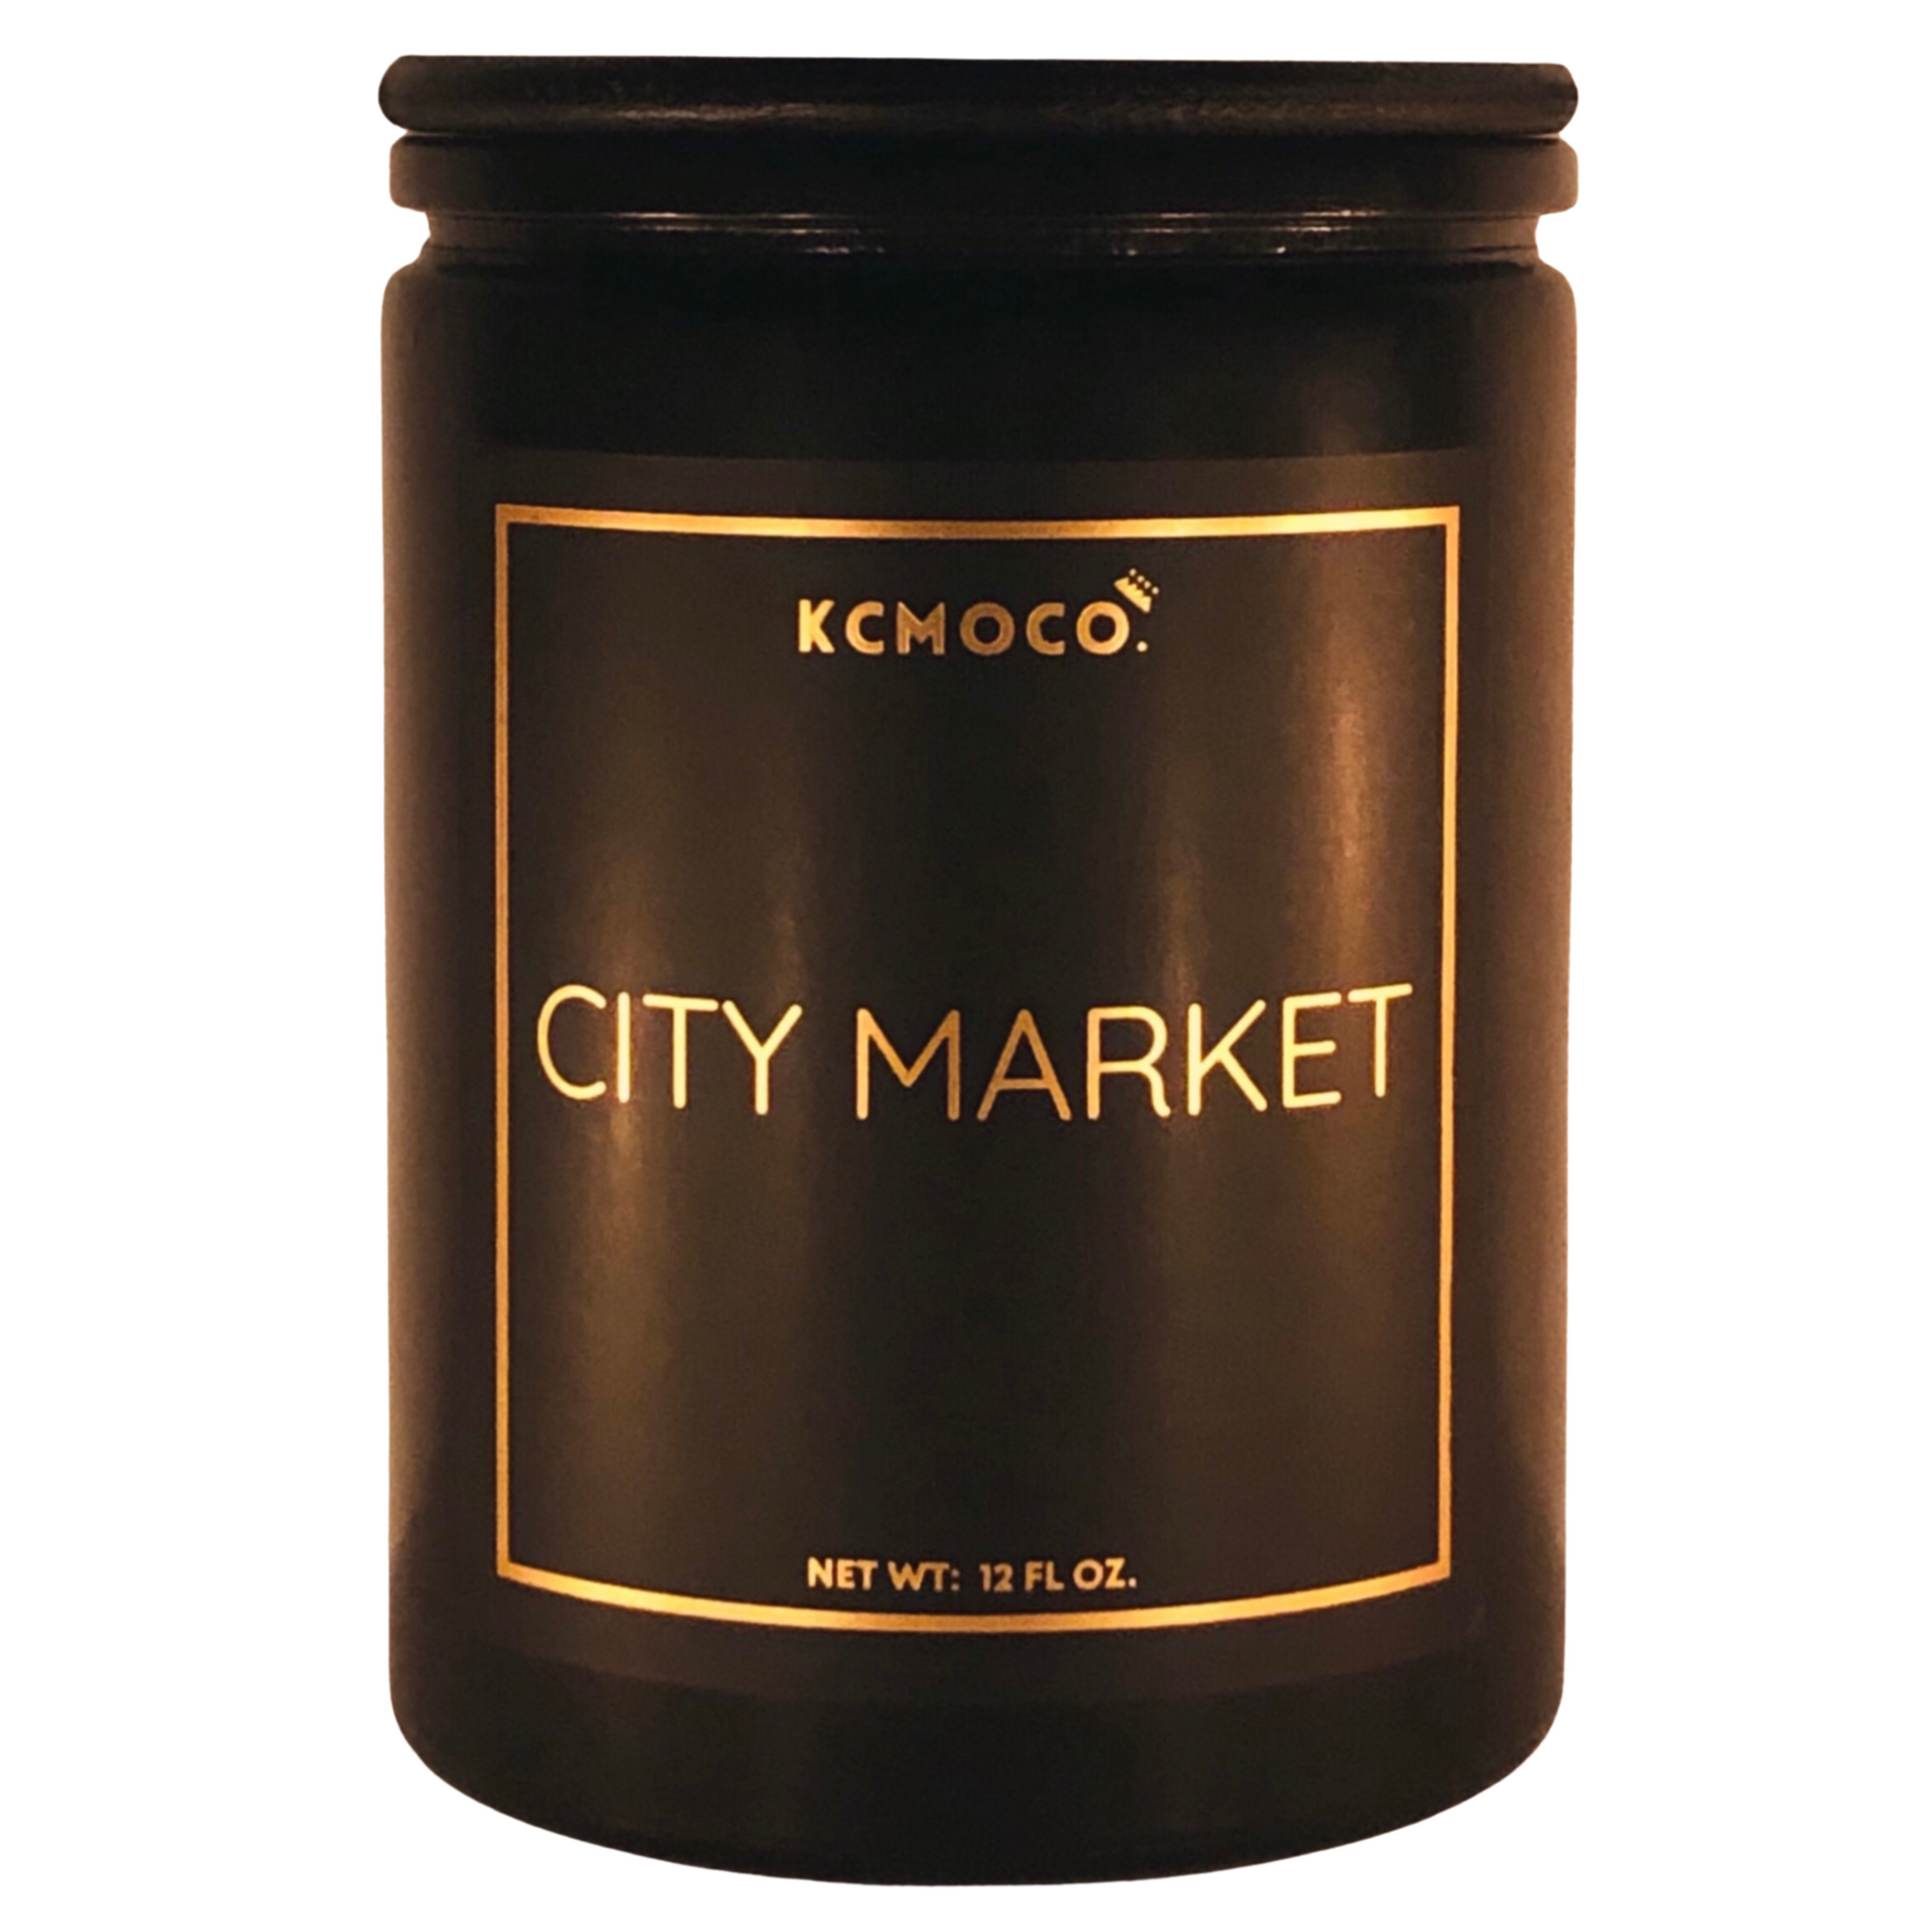 KCMOCO. Candles City Market Candle in Classic Collection Jar: Black glass jar with gold foil label reading "KCMOCO. City Market", with black bamboo lid.